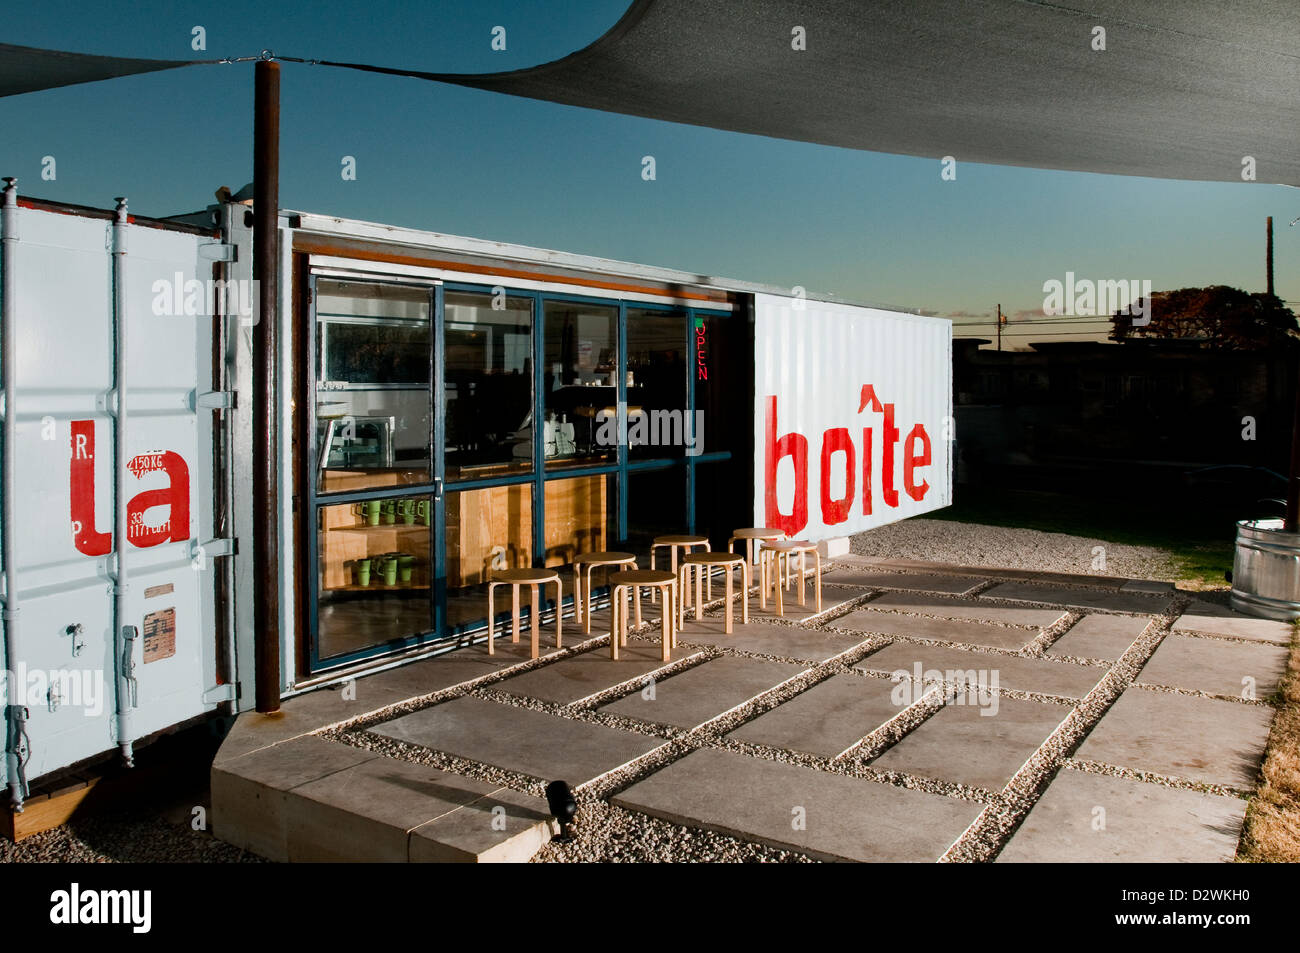 La Boite Cafe in Austin Texas, a mobile coffee shop made of a re-purposed shipping container. Stock Photo